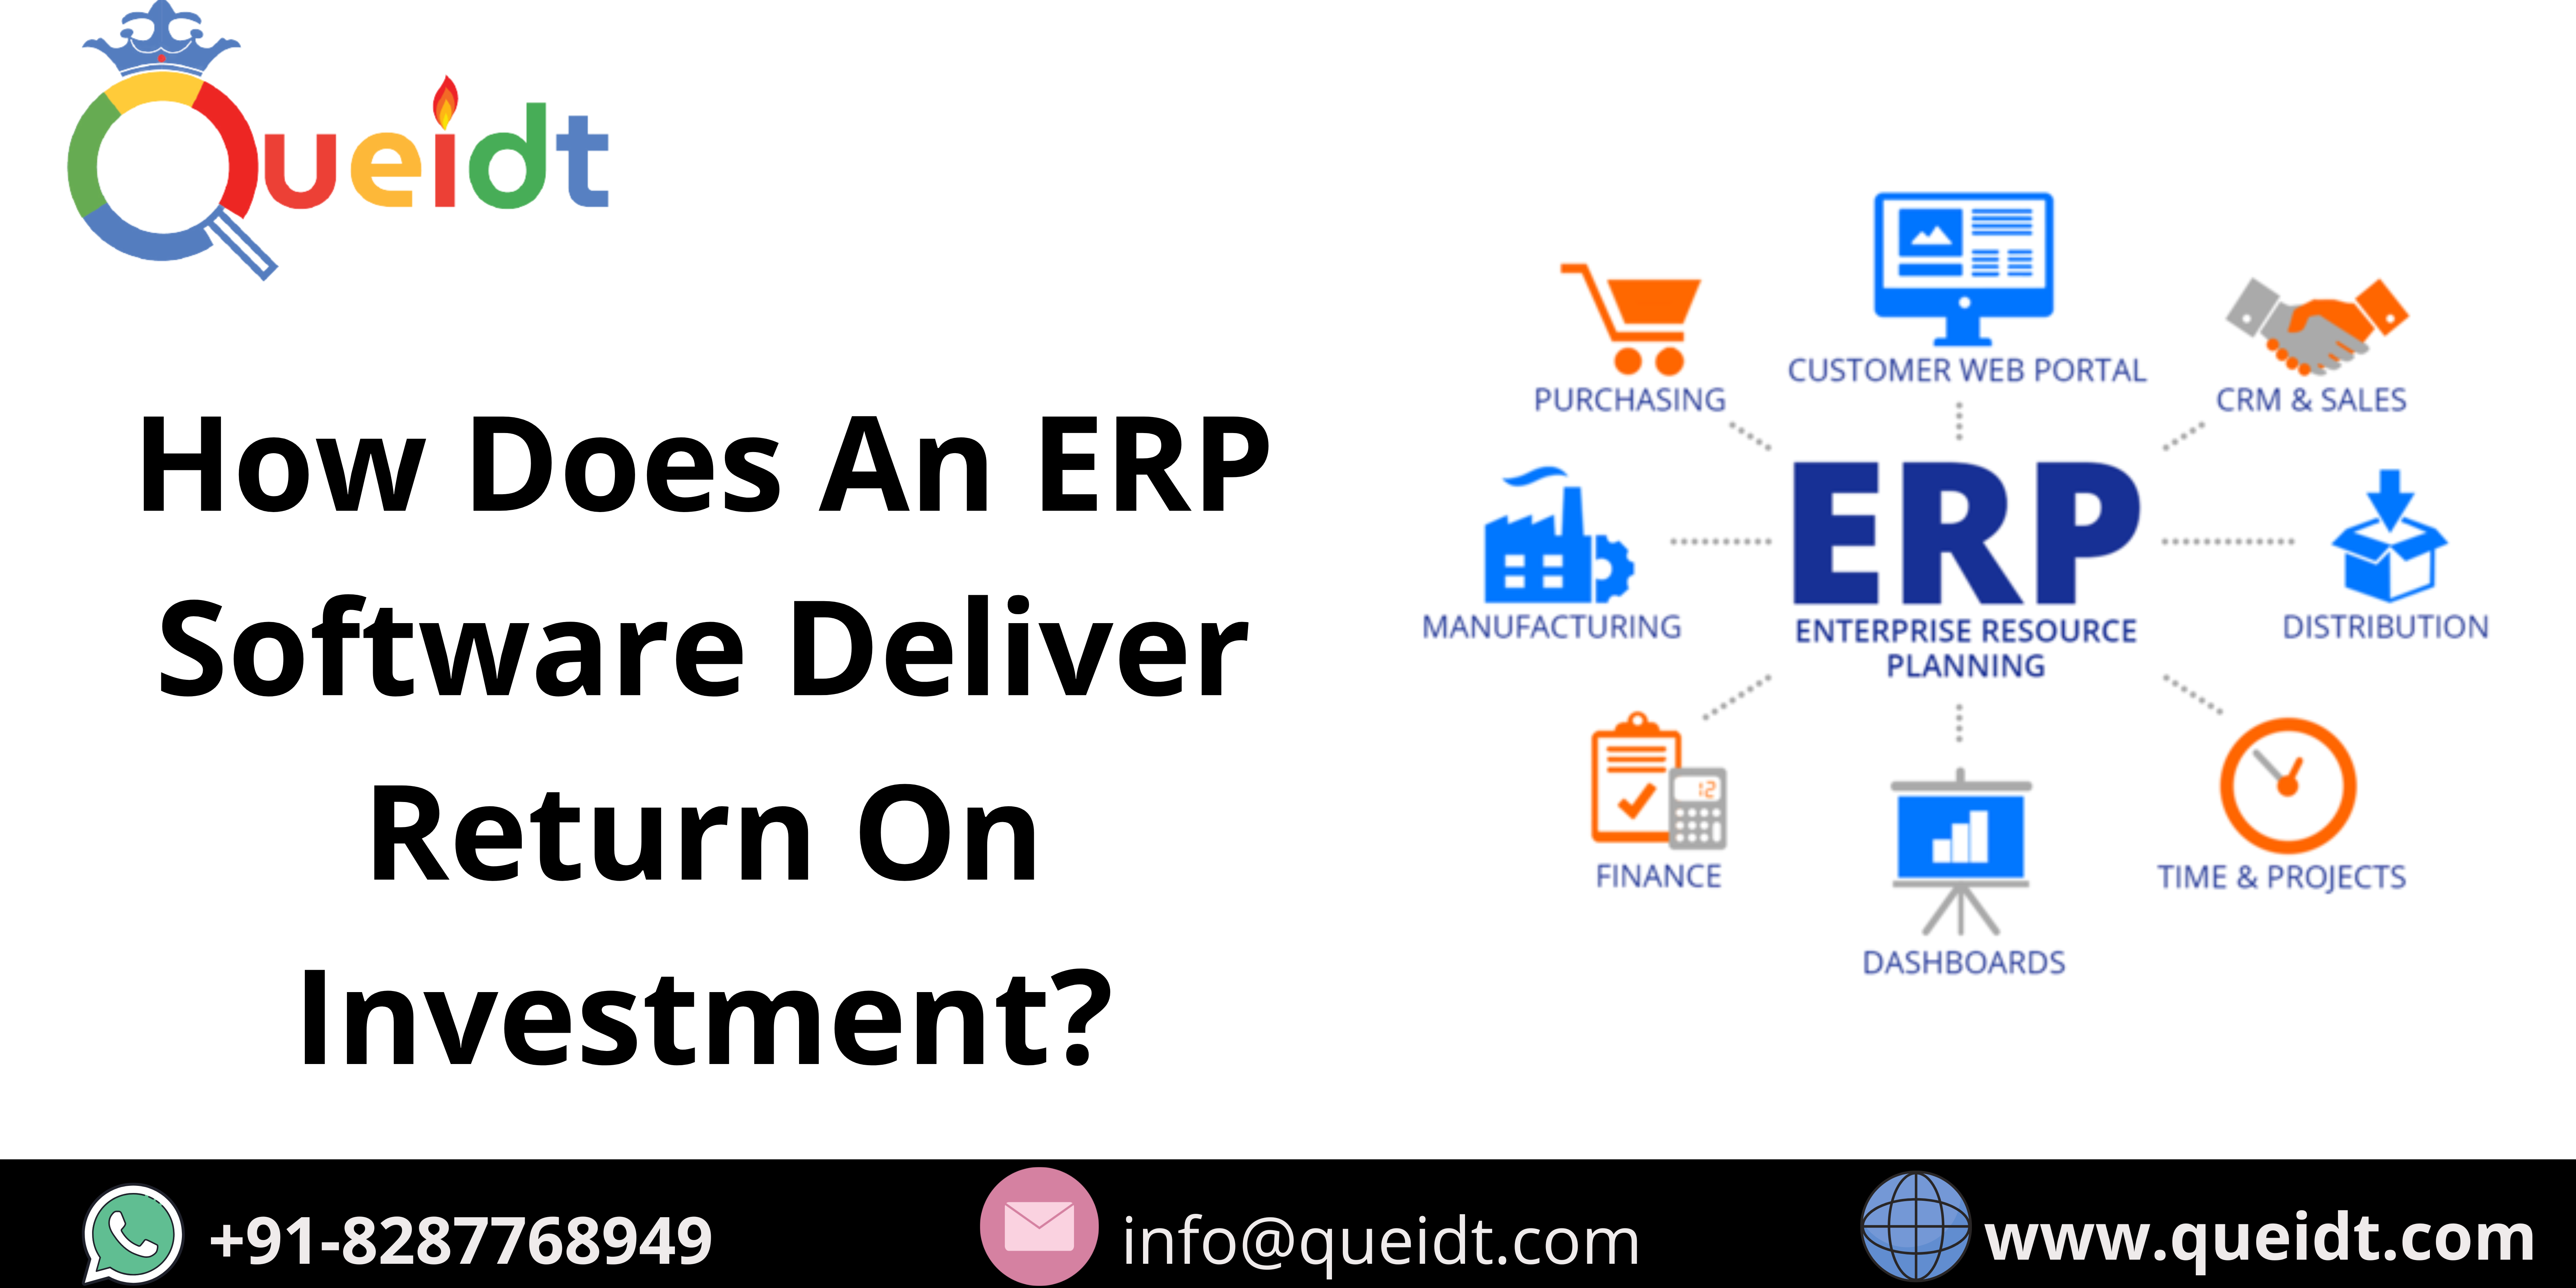 How Does An ERP Software Deliver Return On Investment?